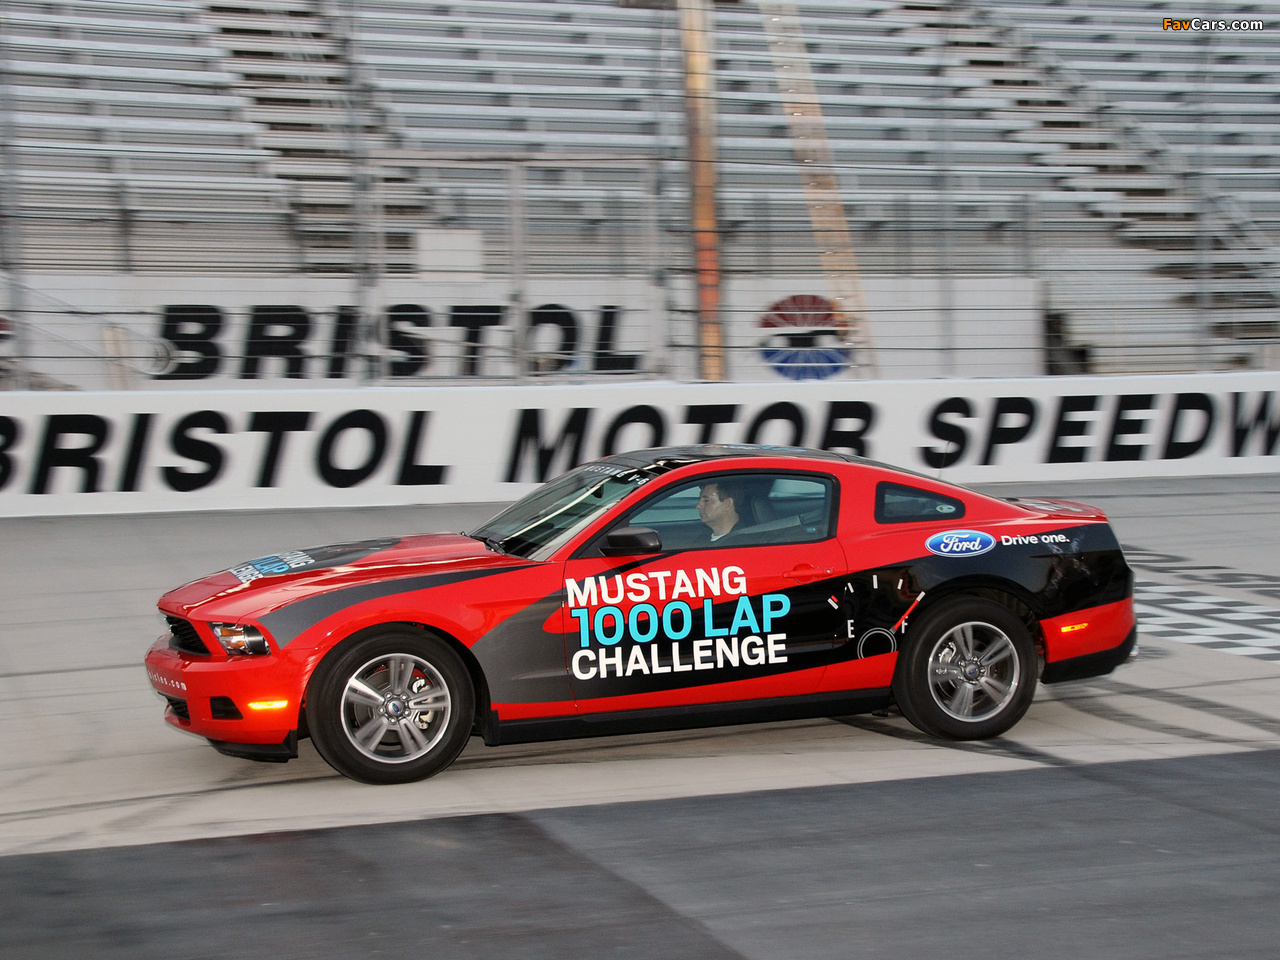 Mustang V6 1000 Lap Challenge 2010 wallpapers (1280 x 960)